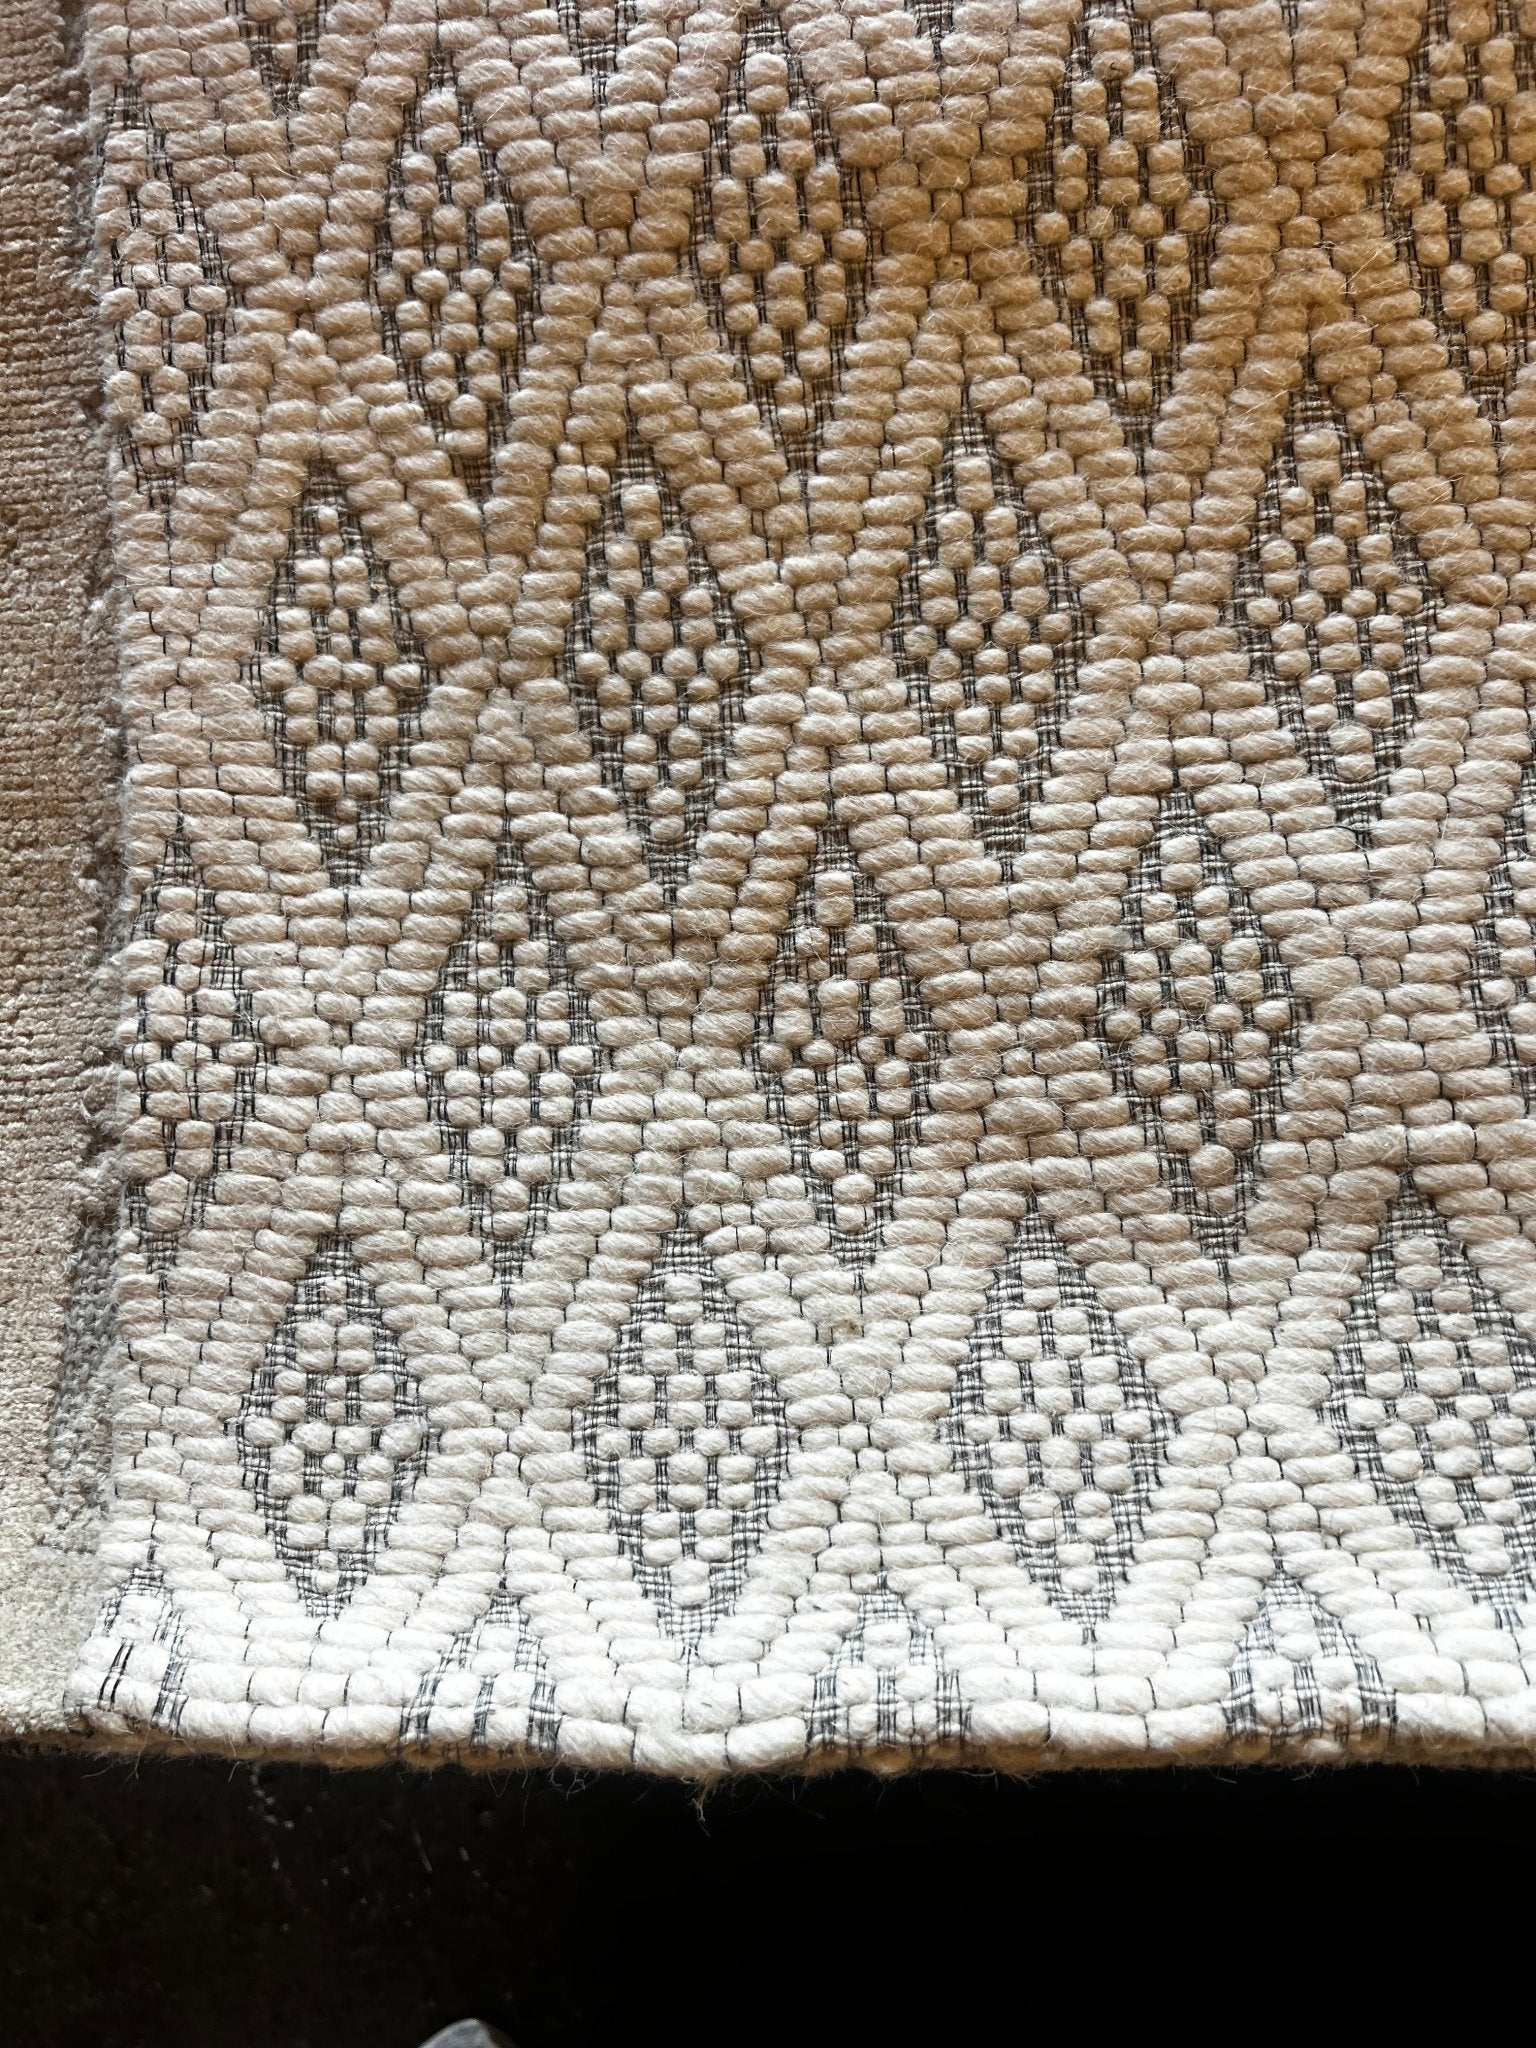 Cameron Tucker 7.9x10 Handwoven Ivory & Grey Jacquard Durrie | Banana Manor Rug Factory Outlet